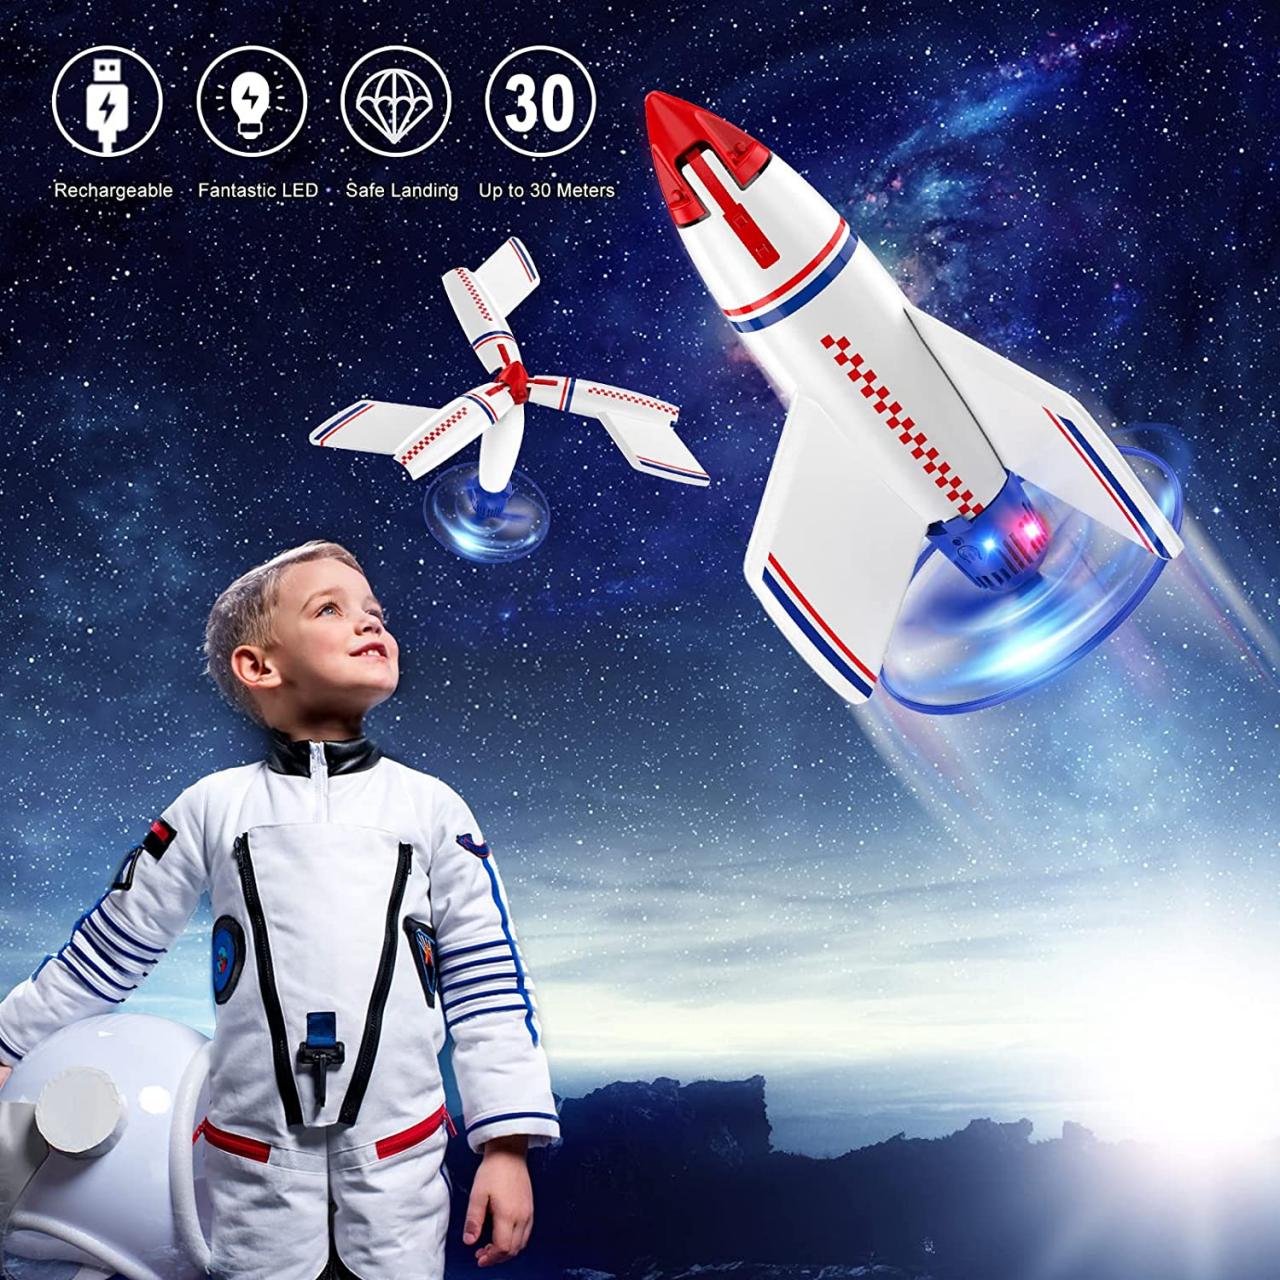 Rocket Launcher For Kids Electric Motorized Air Rocket Toy Outdoor Rocket Toy For Kids Ages 8-12